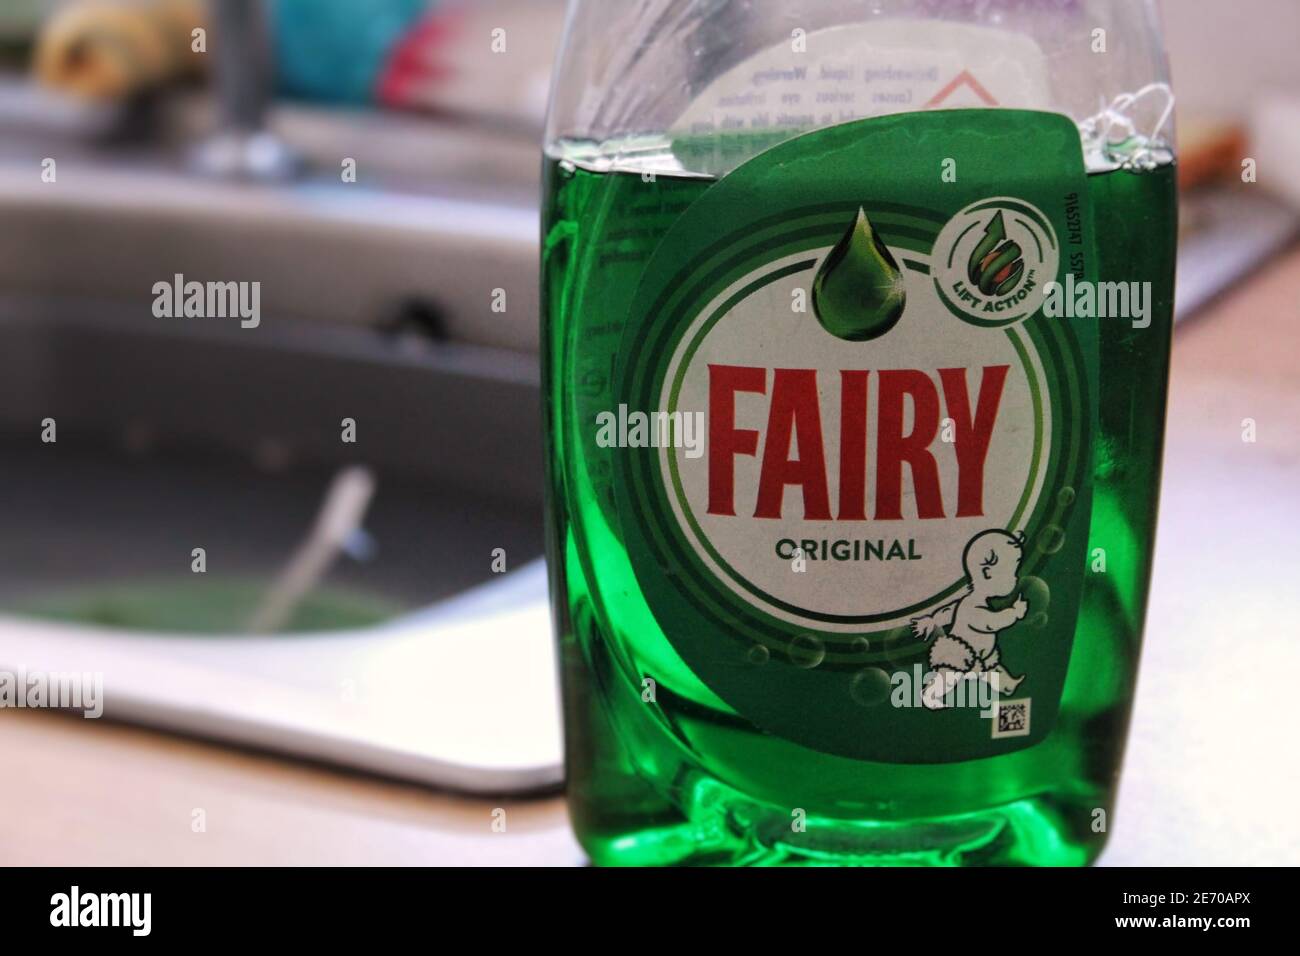 A bottle of fairy washing up liquid in front of a kitchen sink filled with dishes Stock Photo